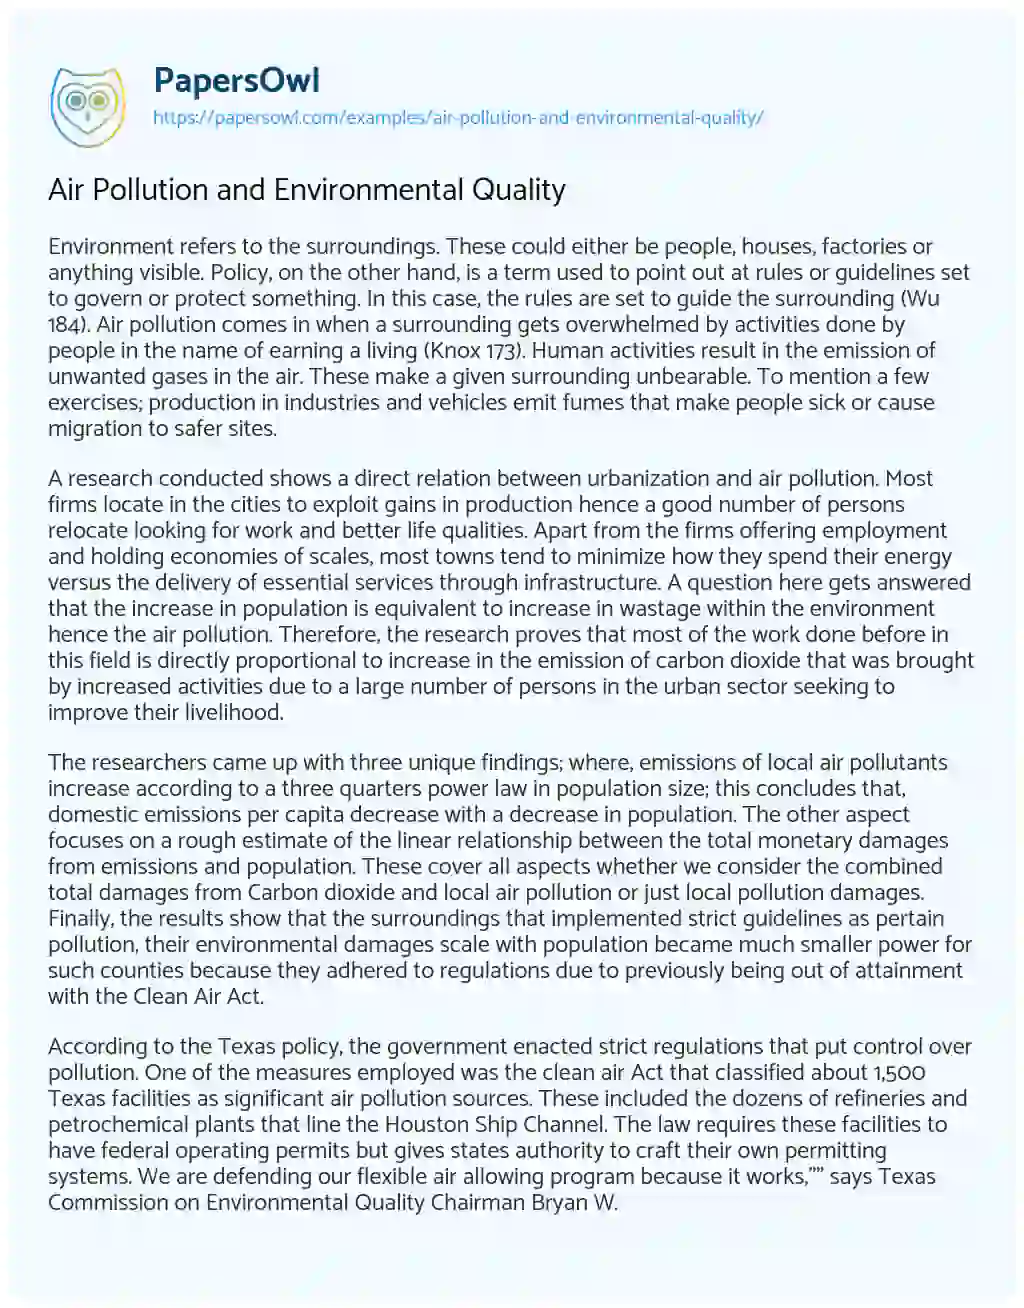 Air Pollution and Environmental Quality essay